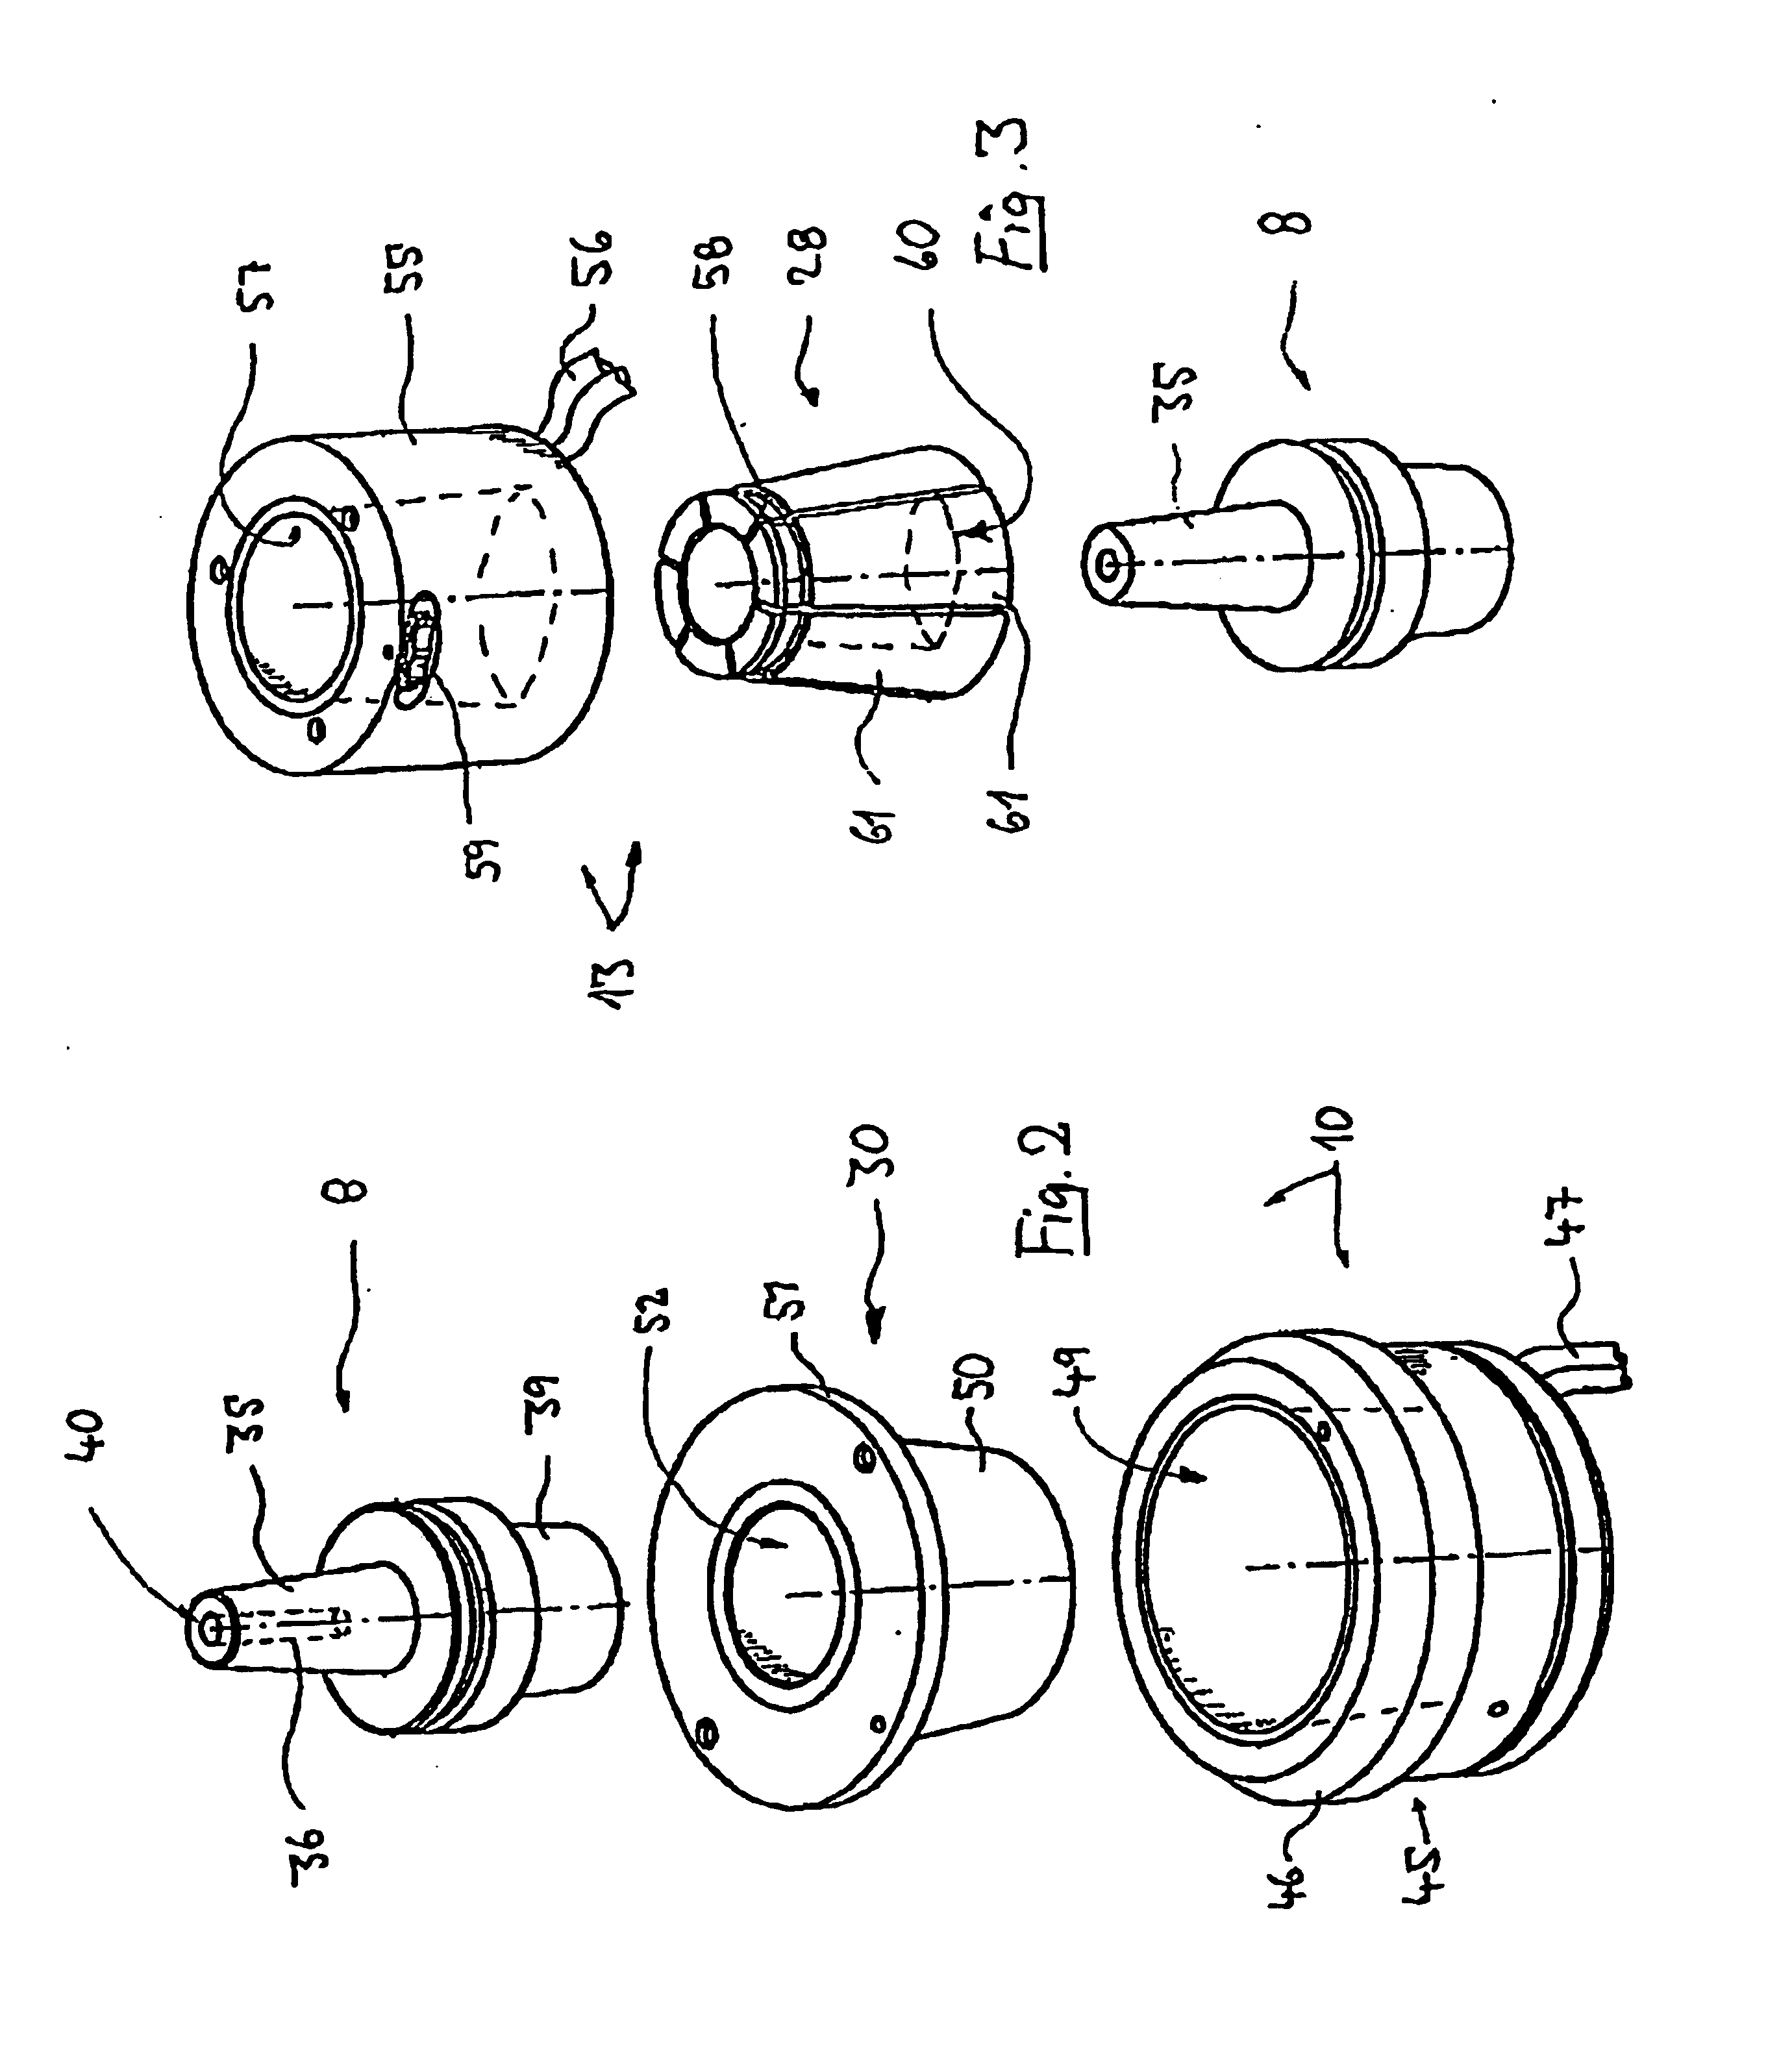 Method and apparatus for the thermal clamping and releasing of tools